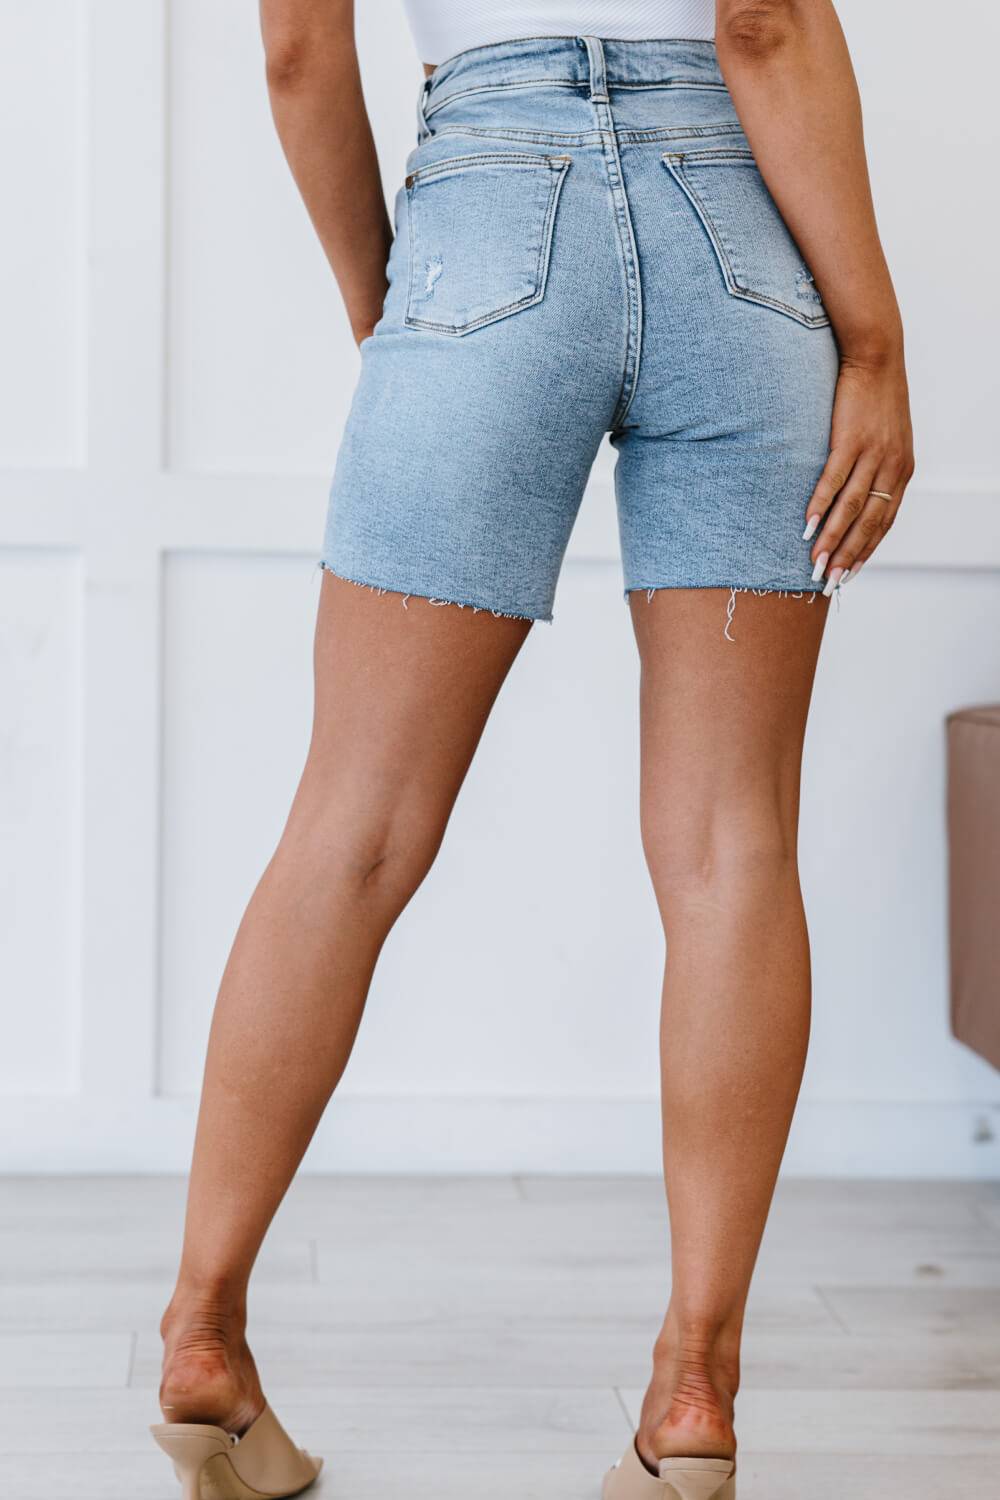 Back View, Judy Blue, Acid Wash Denim Patch High Rise Mid Thigh Shorts. Style Number 150094